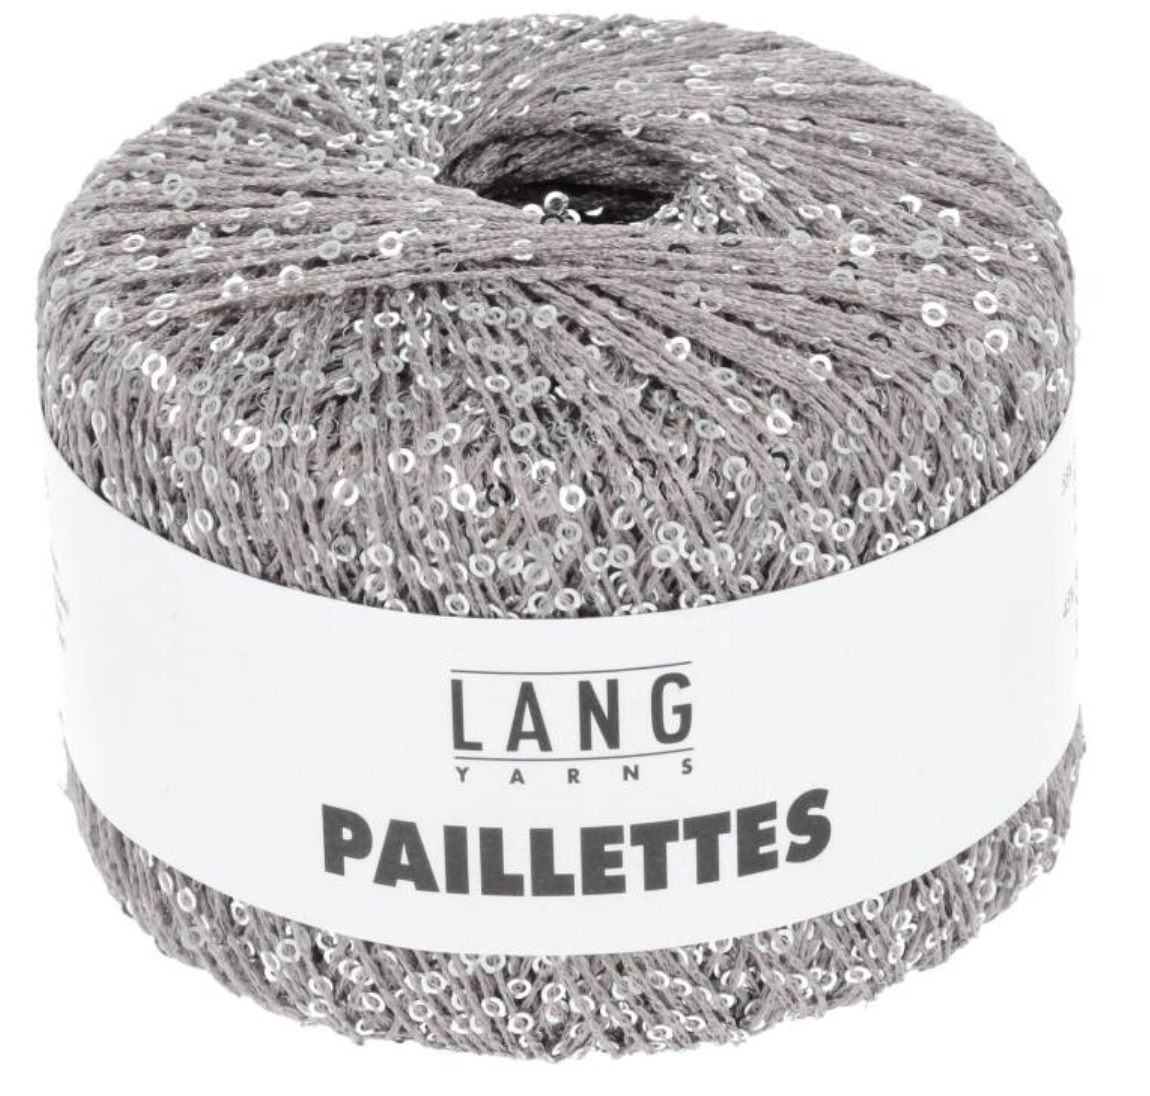 Lang Yarns - Paillettes - YourNextKnit